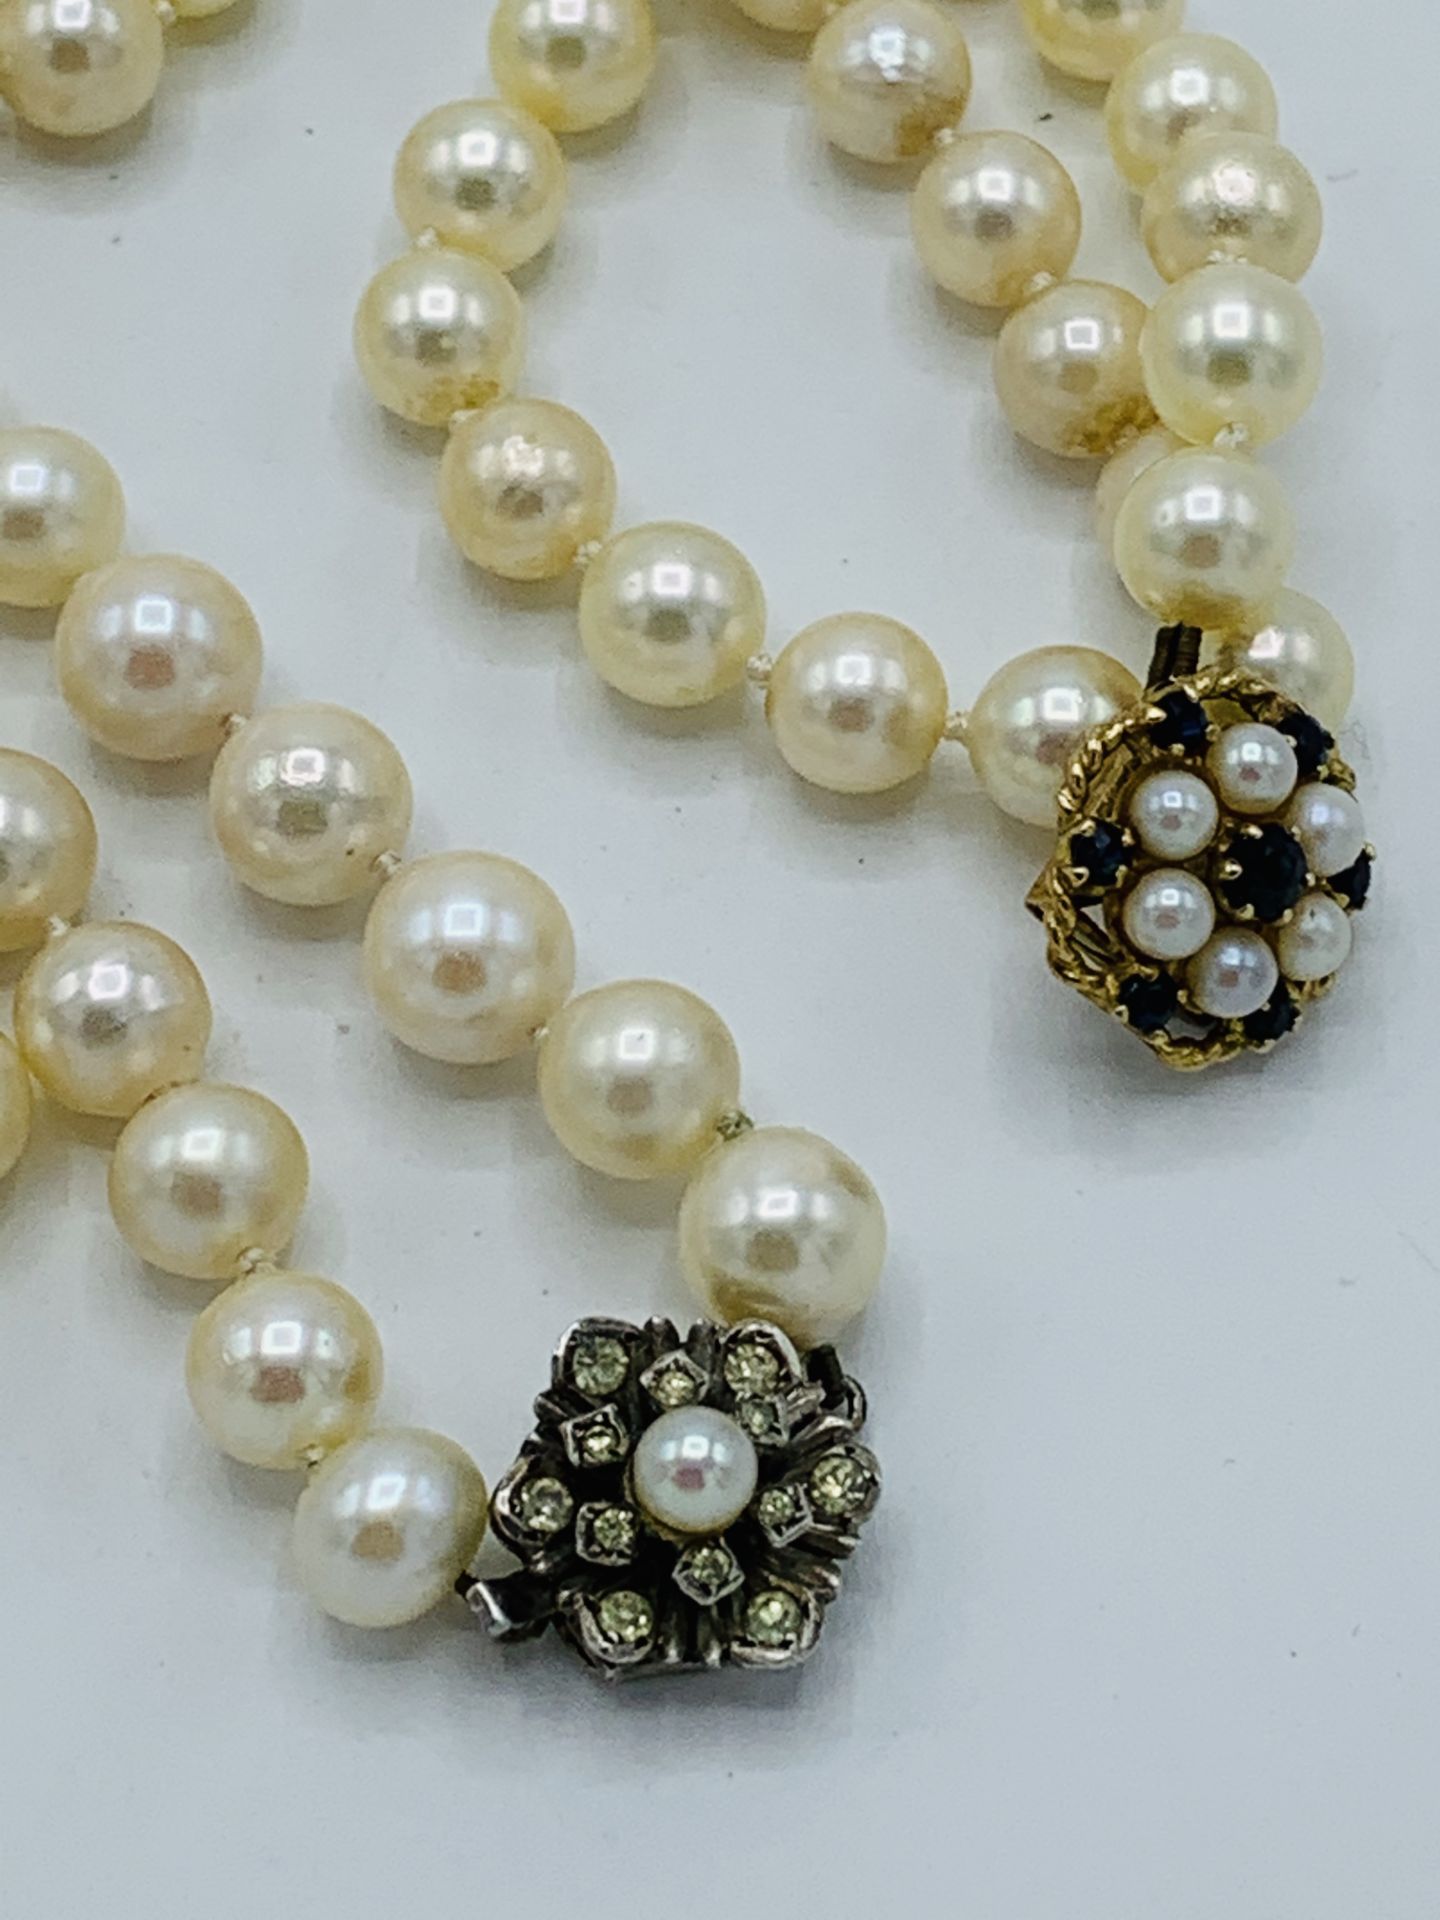 Necklace of 3 ropes of pearls with 9ct gold, sapphire and pearl clasp - Image 2 of 3